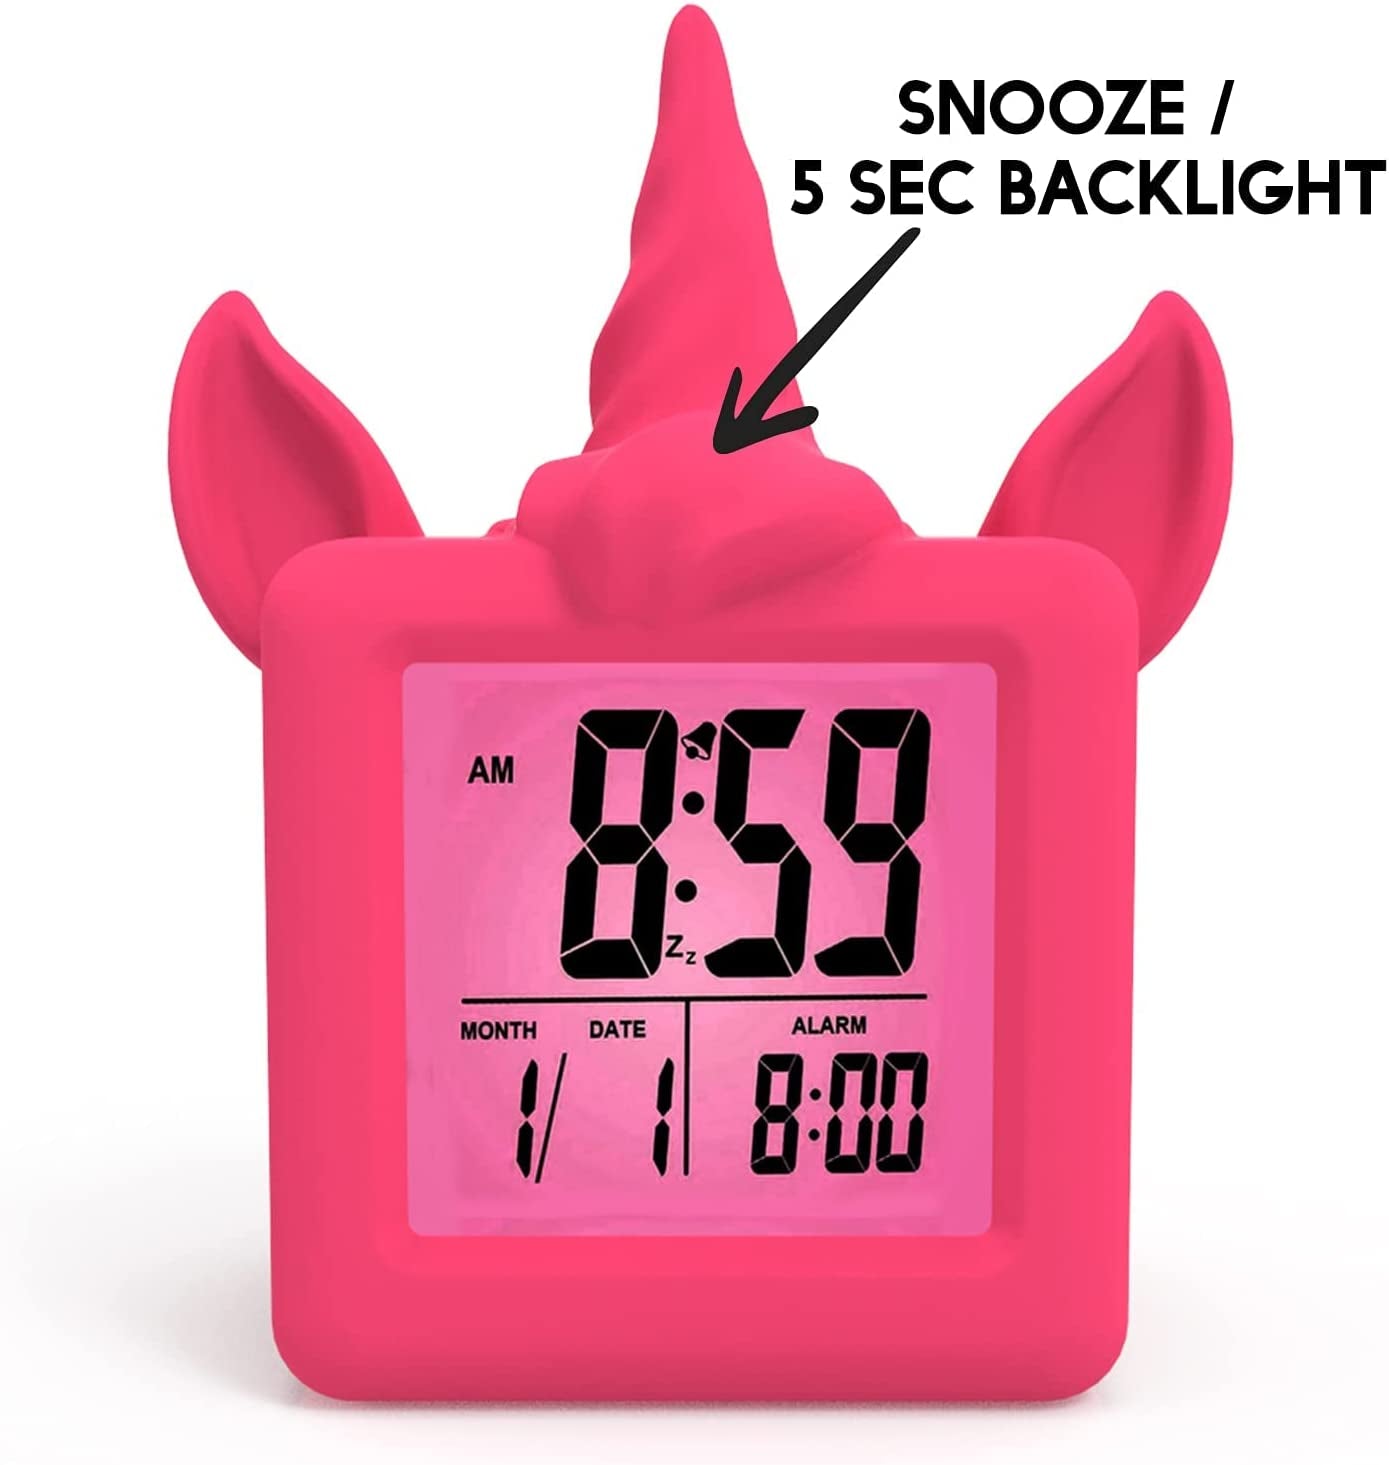 Something Unicorn - Unicorn Digital Alarm Clock with Snooze Button and Pink LCD Back-Lighting. Easy to Set Battery Powered Digital Clock in Silicone Sleeve with Time, Date and Alarm Display. (Pink)